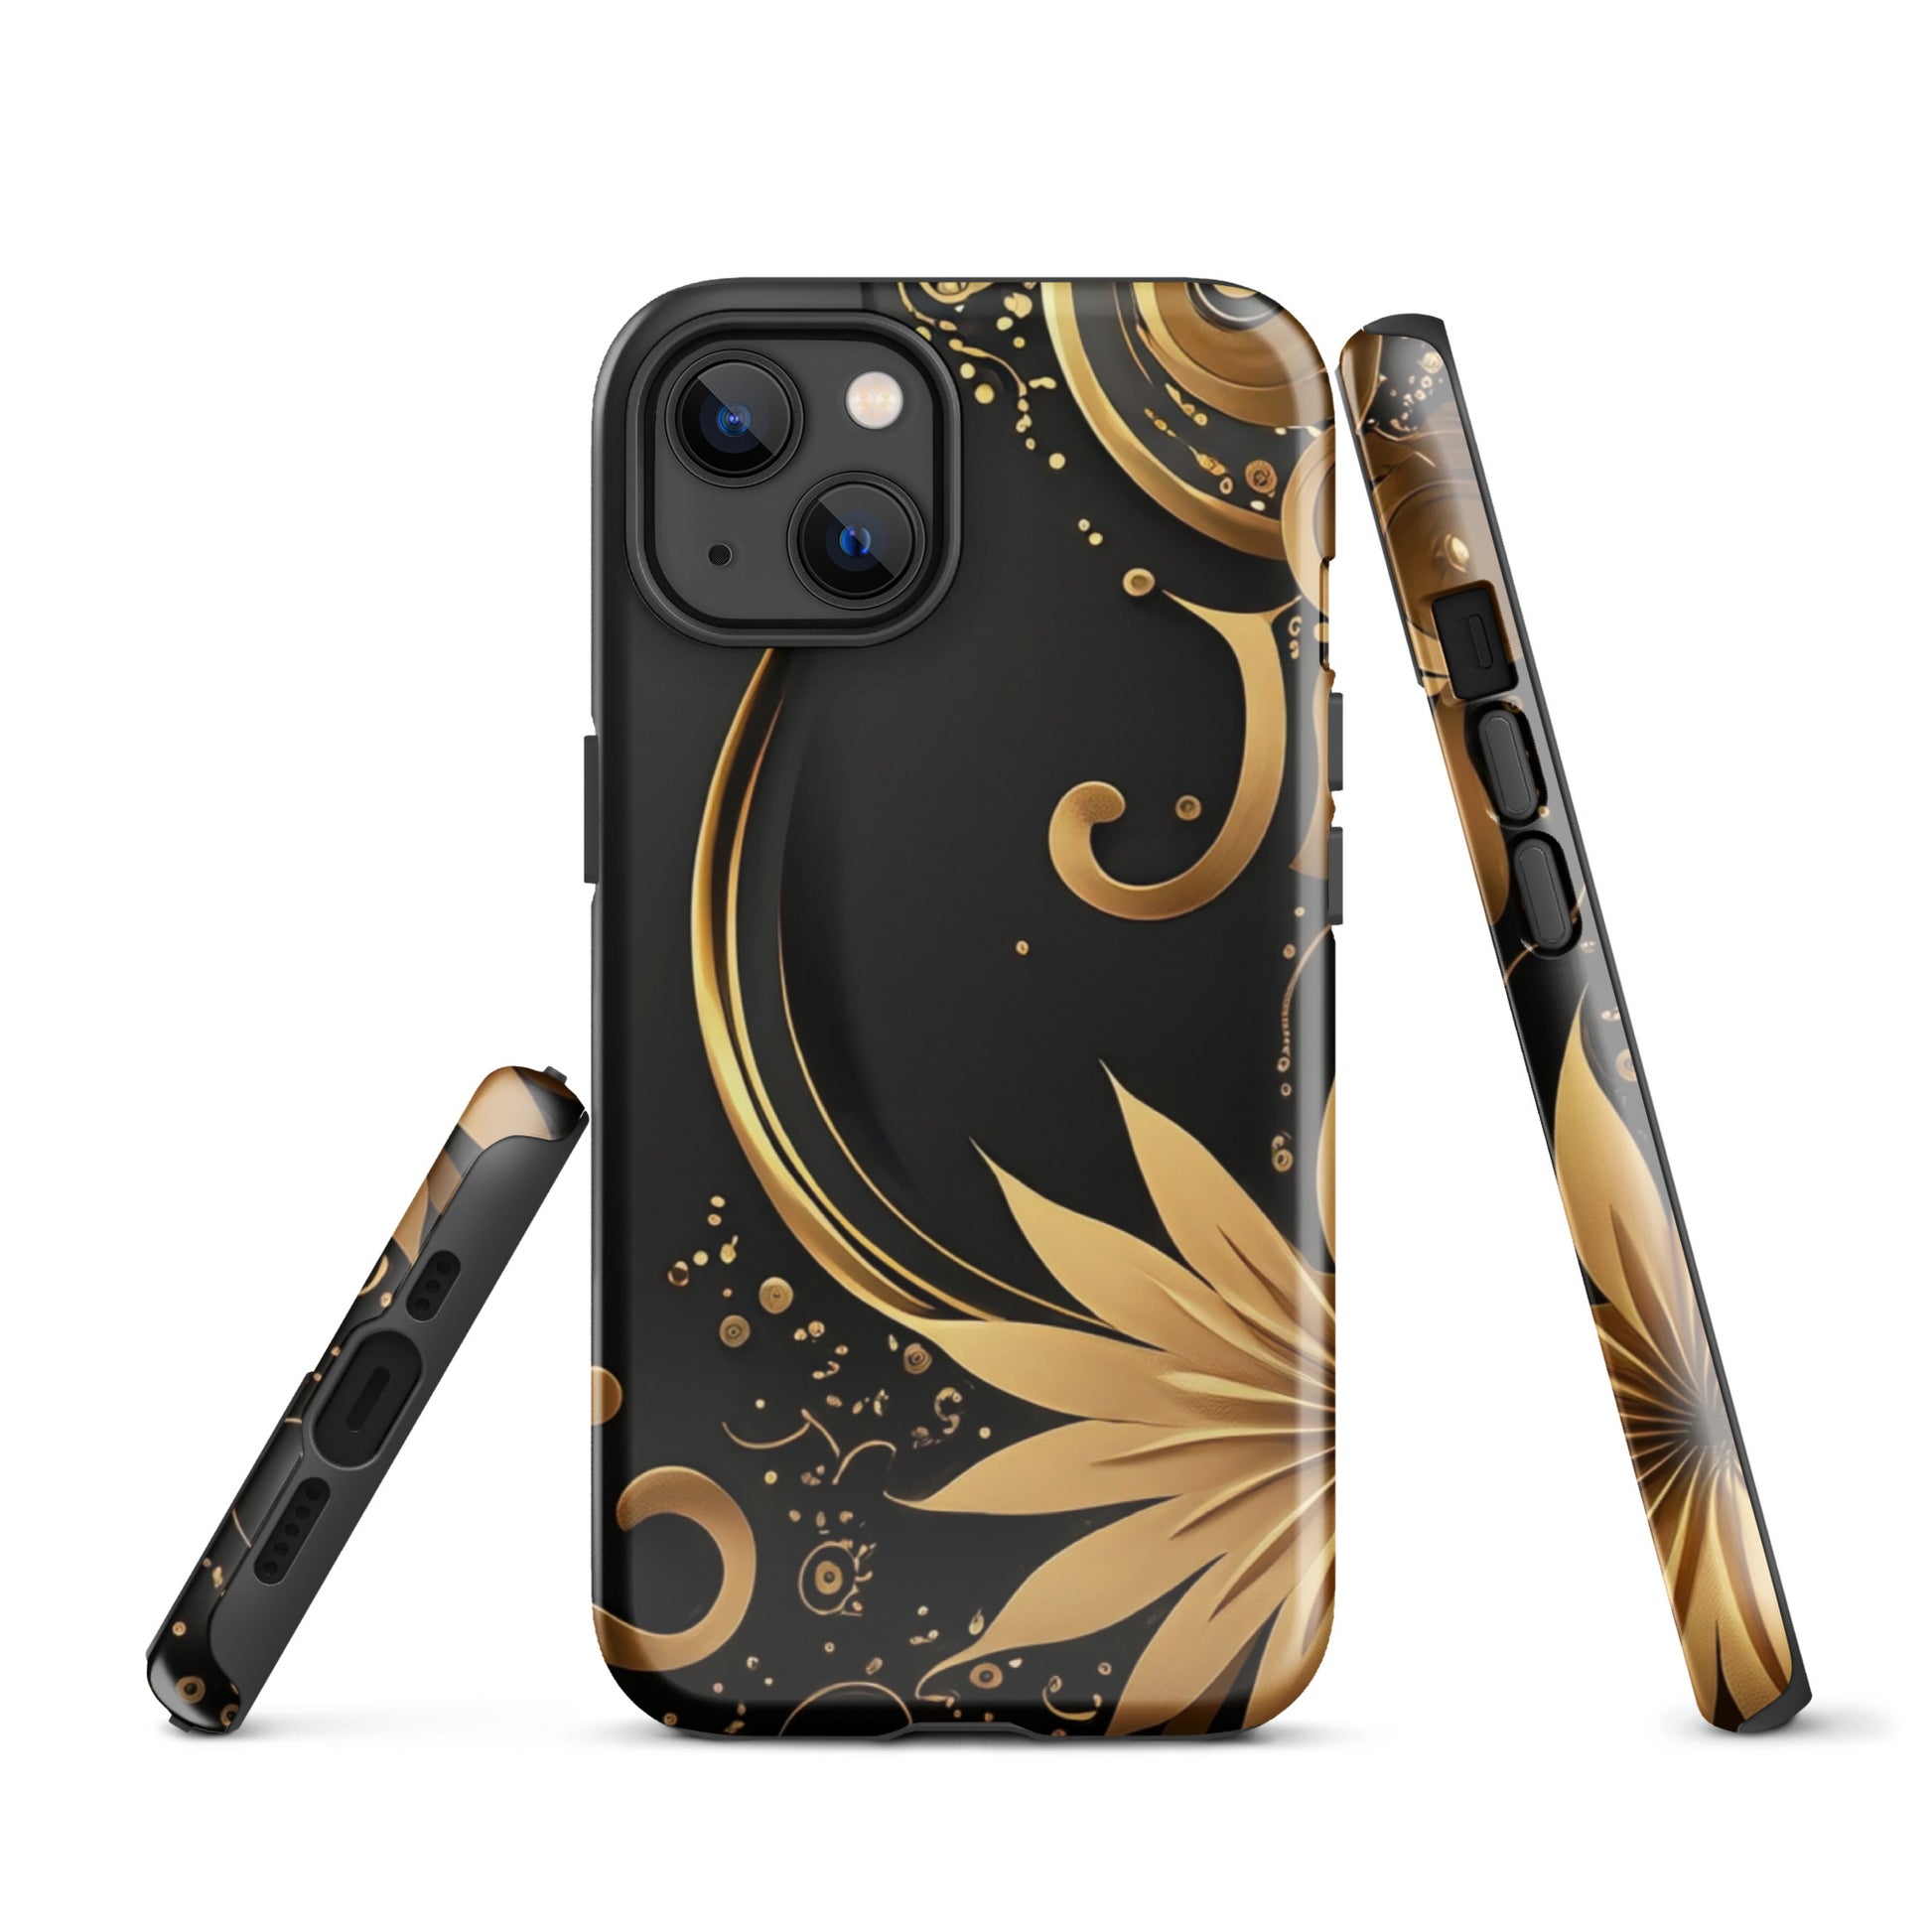 A Golden Flower Case for the iPhone 13